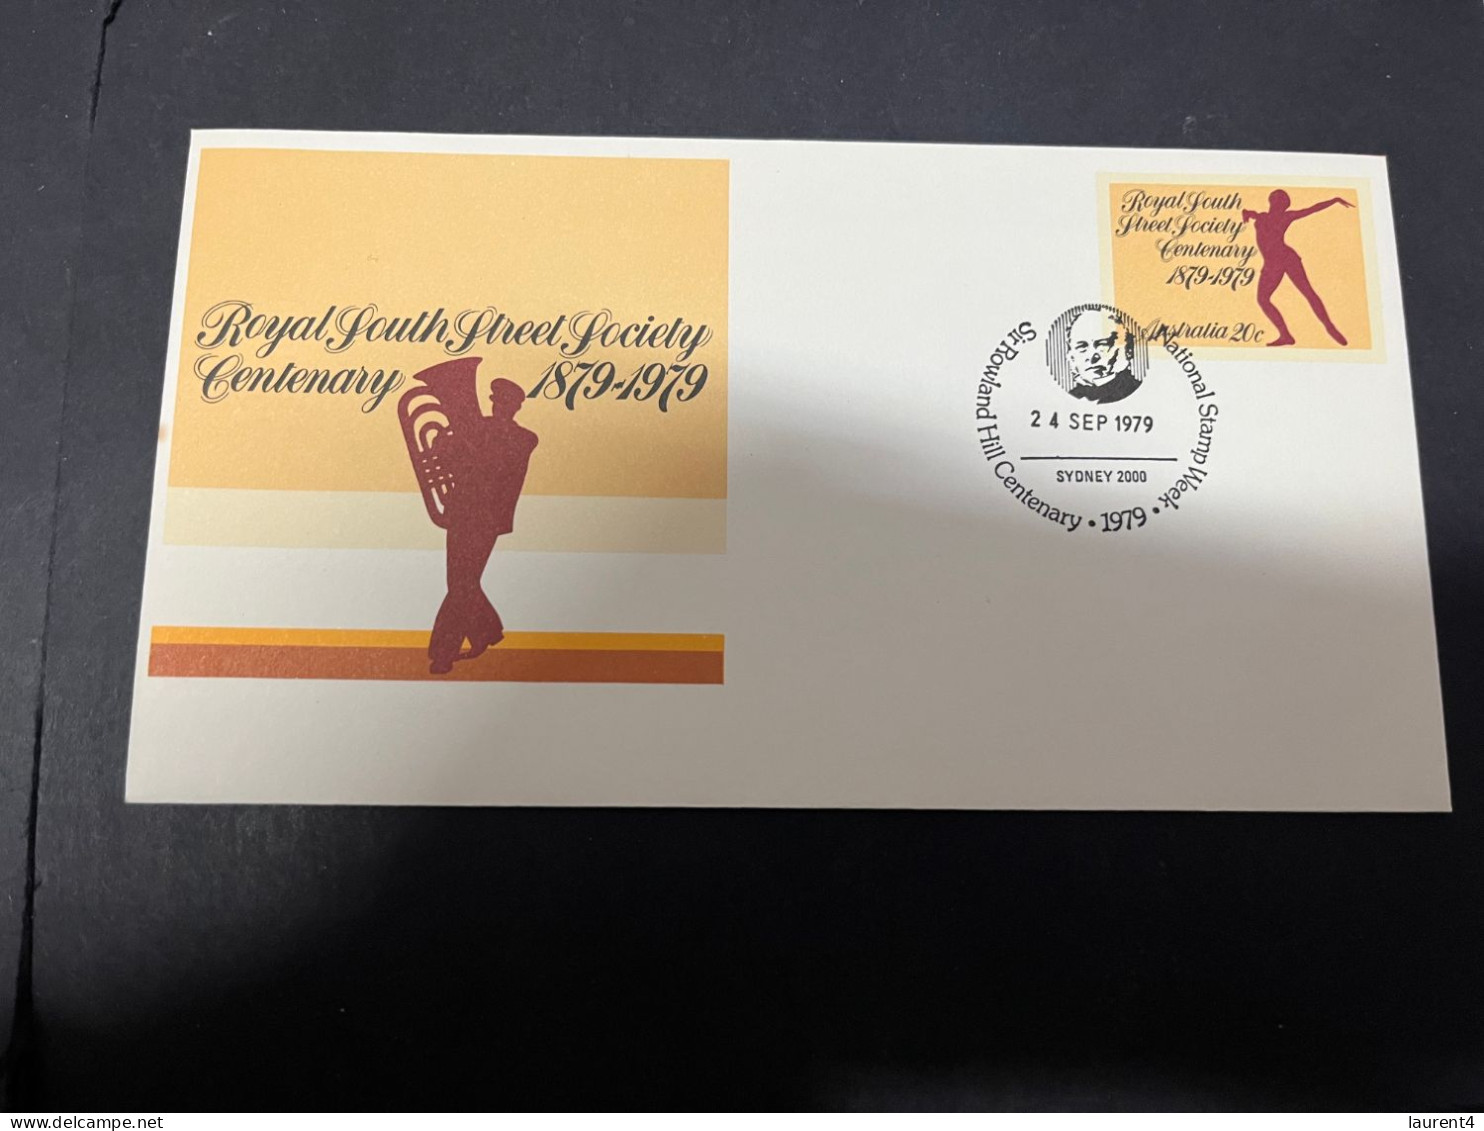 26-4-2024 (3 Z 9) Australia FDC - 1979 - Sir Rowland Hill Centenary (special P/m) - Premiers Jours (FDC)